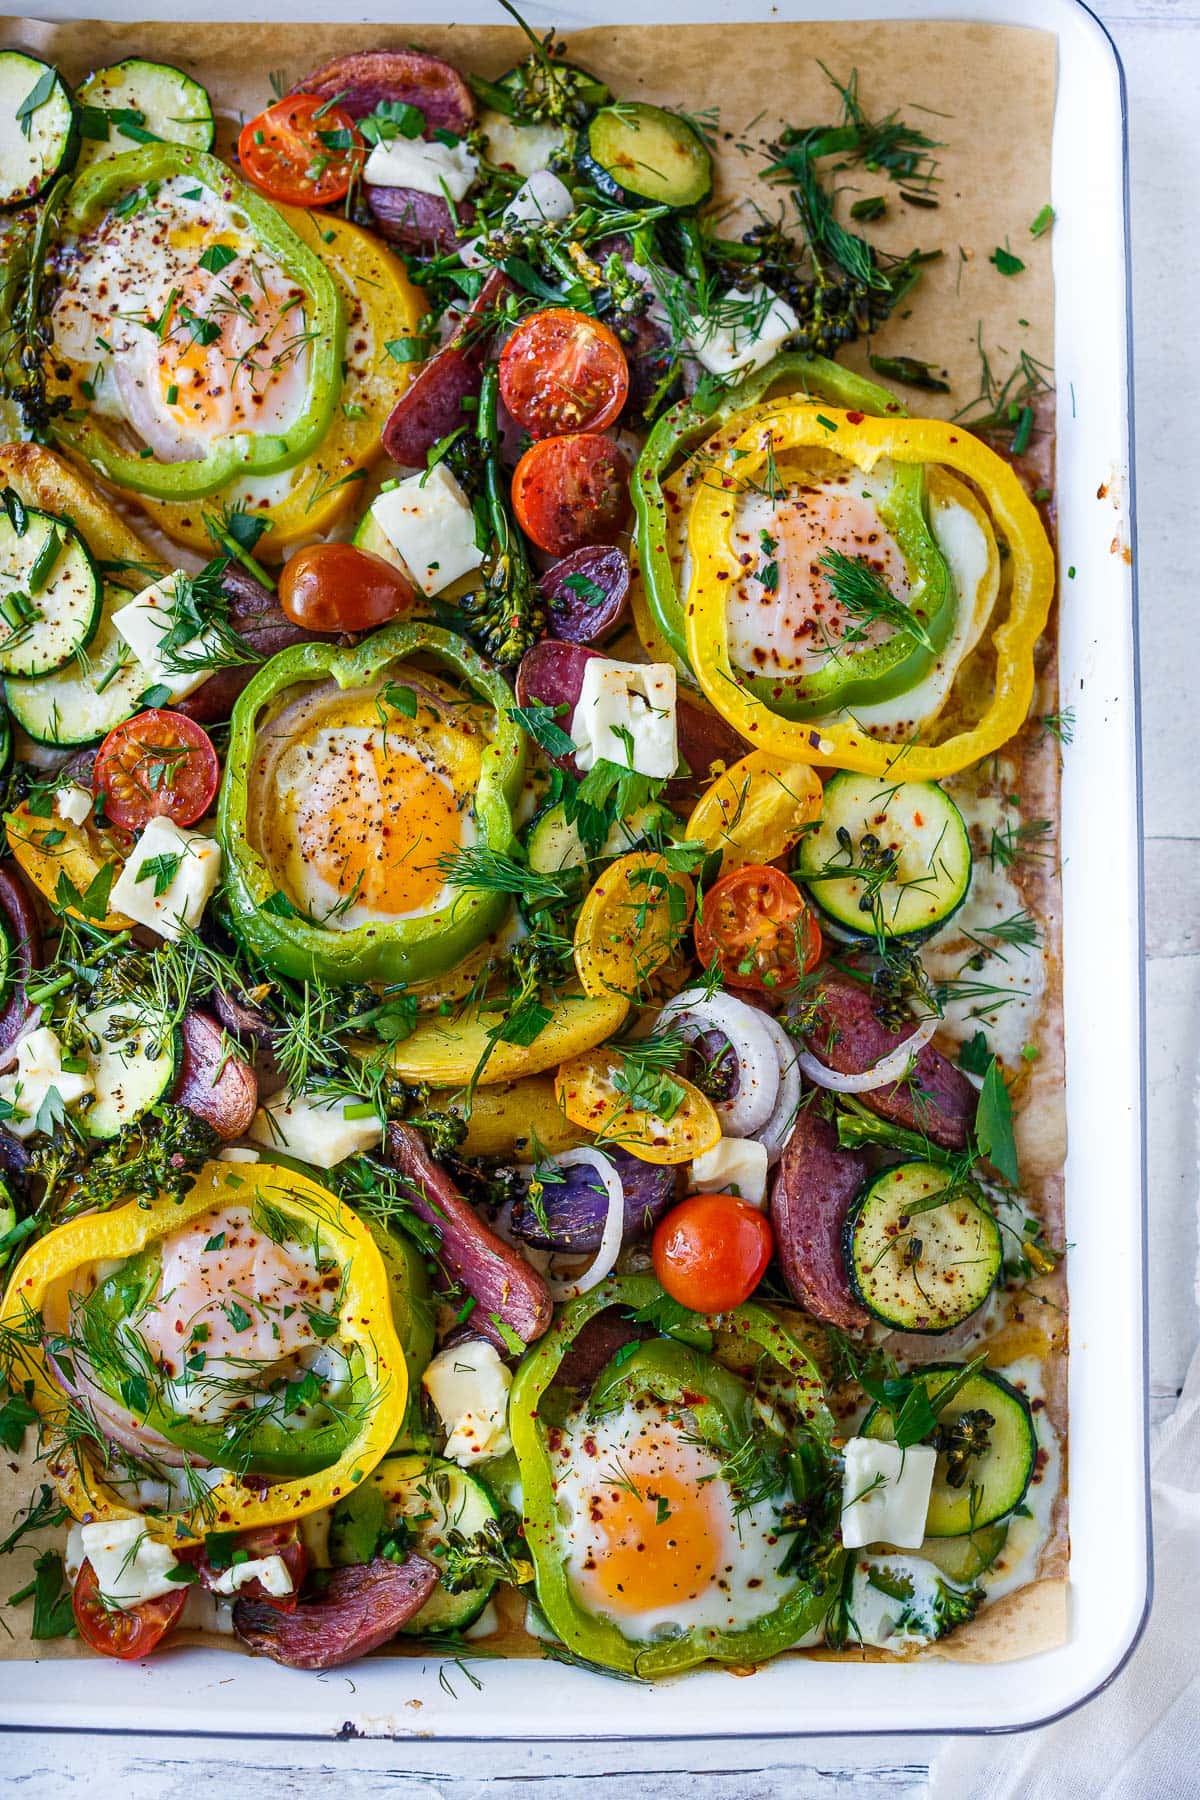 These Baked Eggs are so fun and easy to make! Eggs are baked in the oven on a sheet pan cradled inside rings of bell pepper along with roasted potatoes, zucchini, and tomatoes. Top them with feta and fresh herbs. 